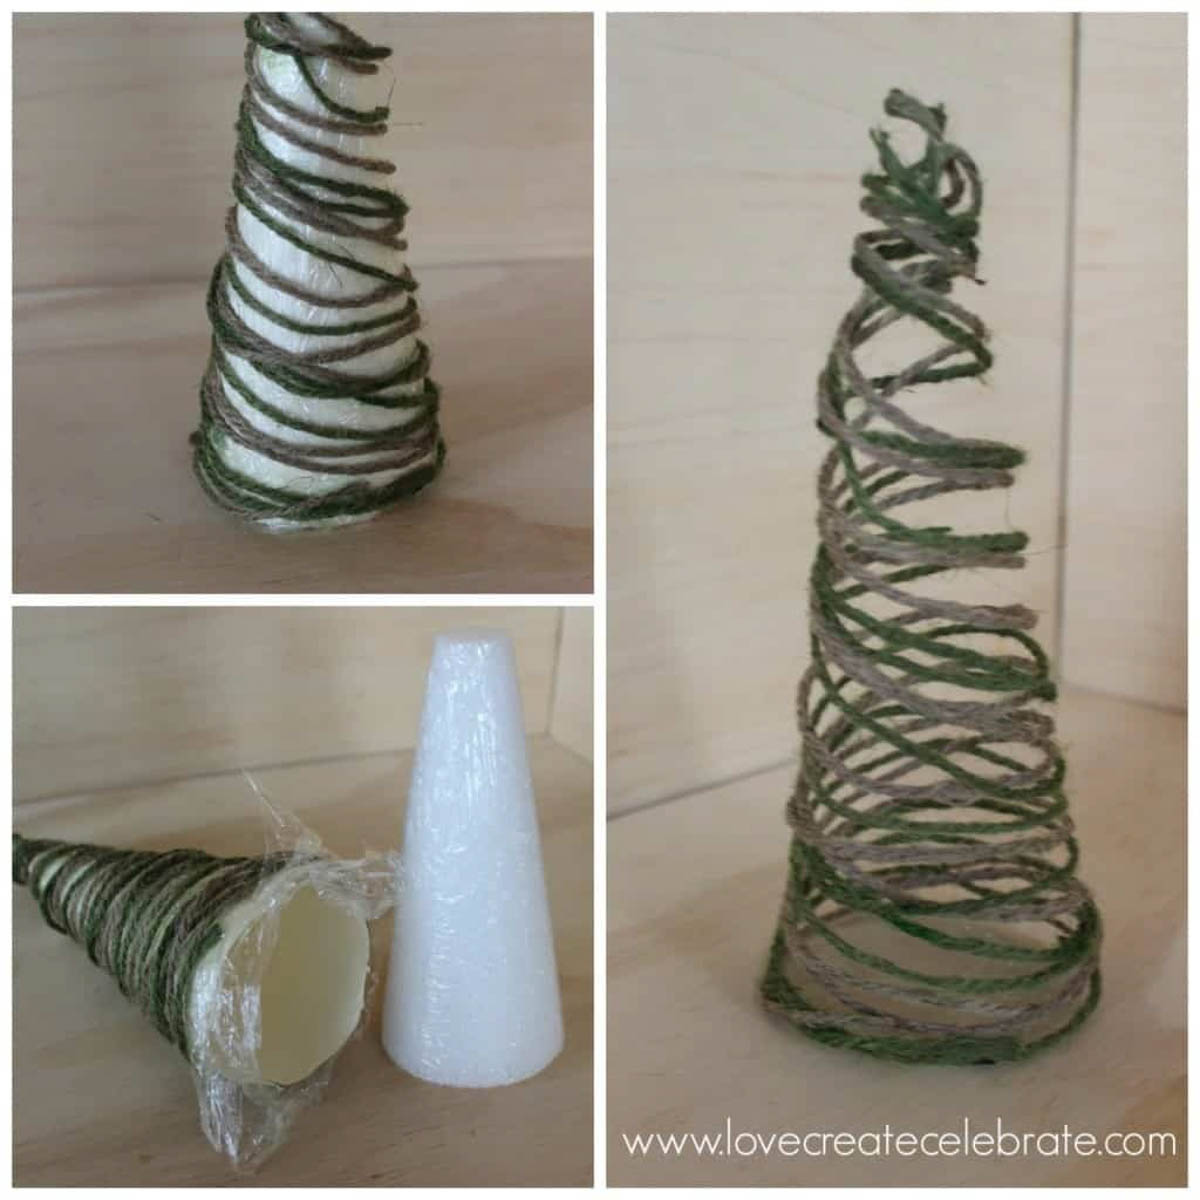 Image collage of string Christmas trees